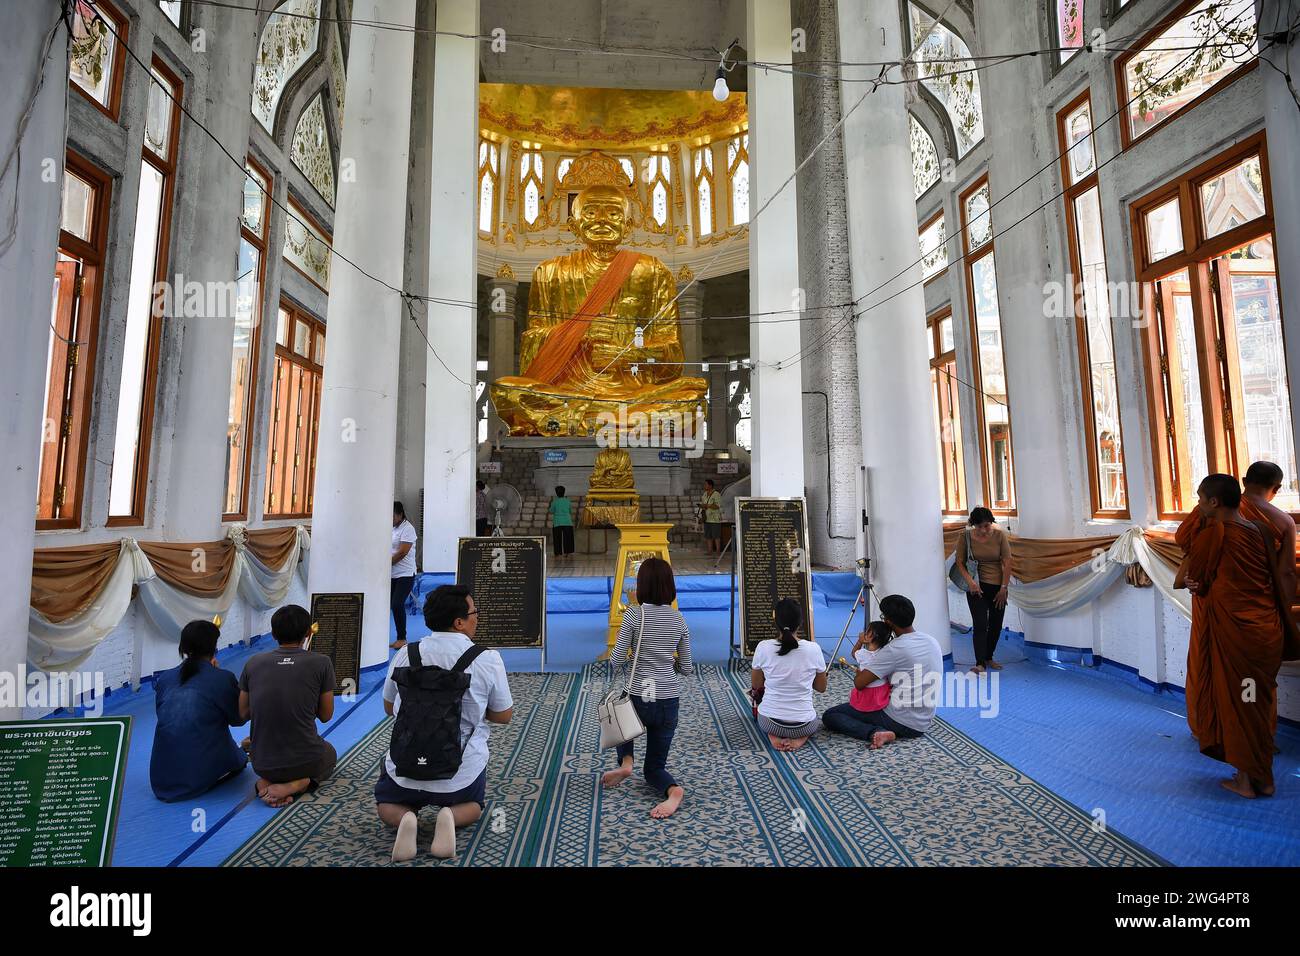 Sikhio, Thailand - Jun 4, 2019: Pilgrims and prayers are paying respect to the highly famous monk statue cover by gold and have a name 'Somdet Phra Bu Stock Photo